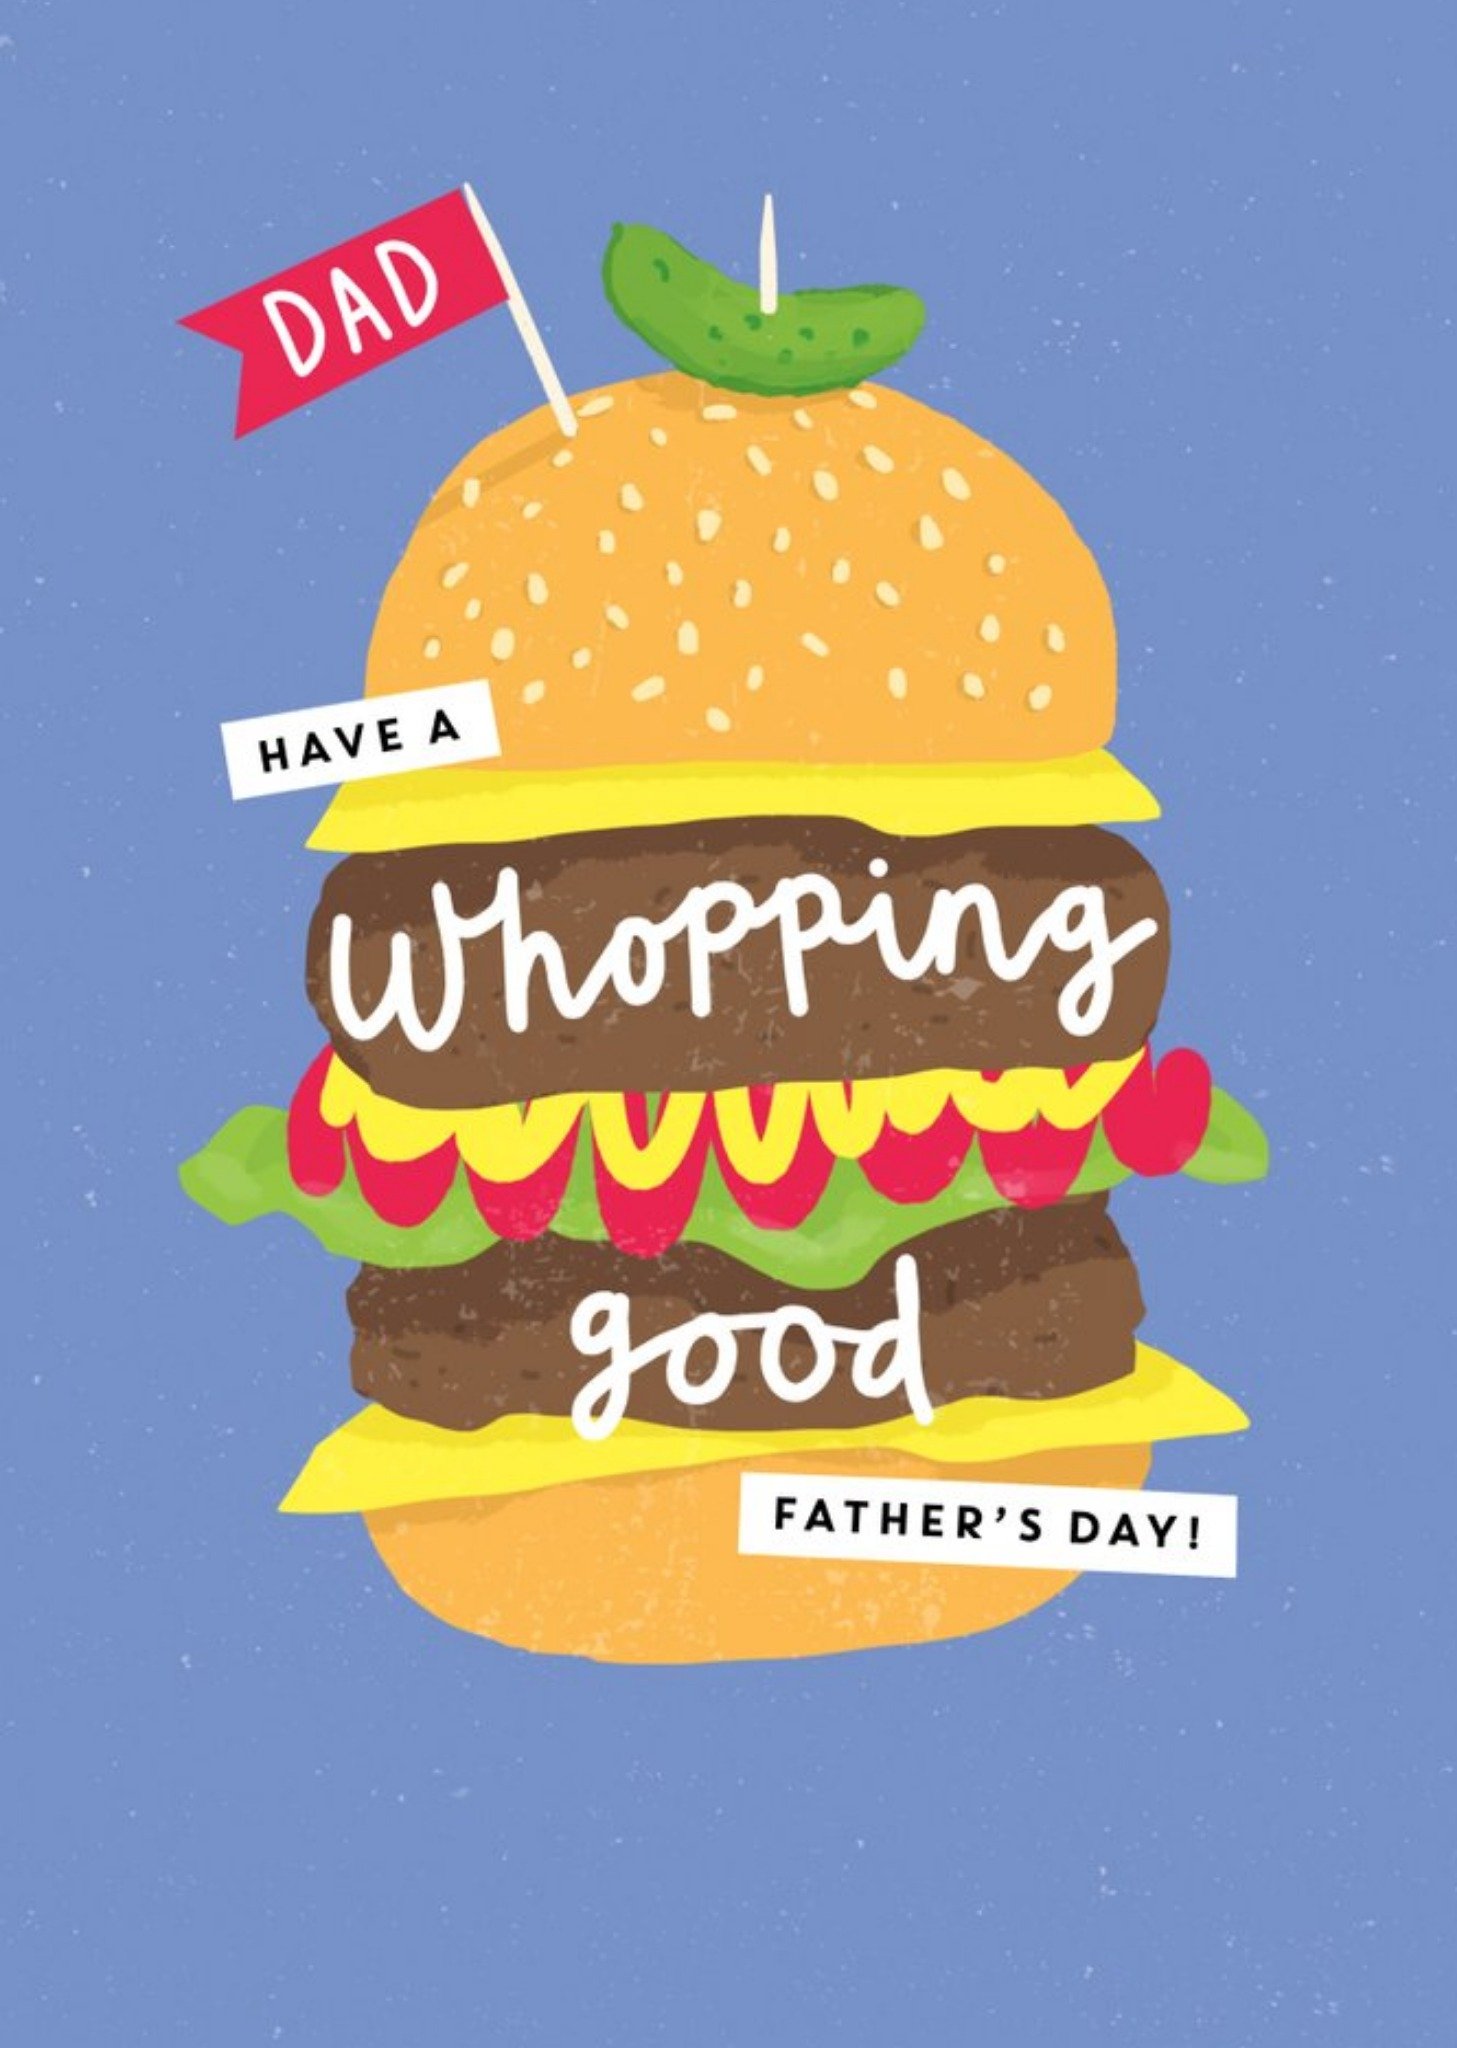 Moonpig Dad Have A Whopping Good Father's Day Card Ecard